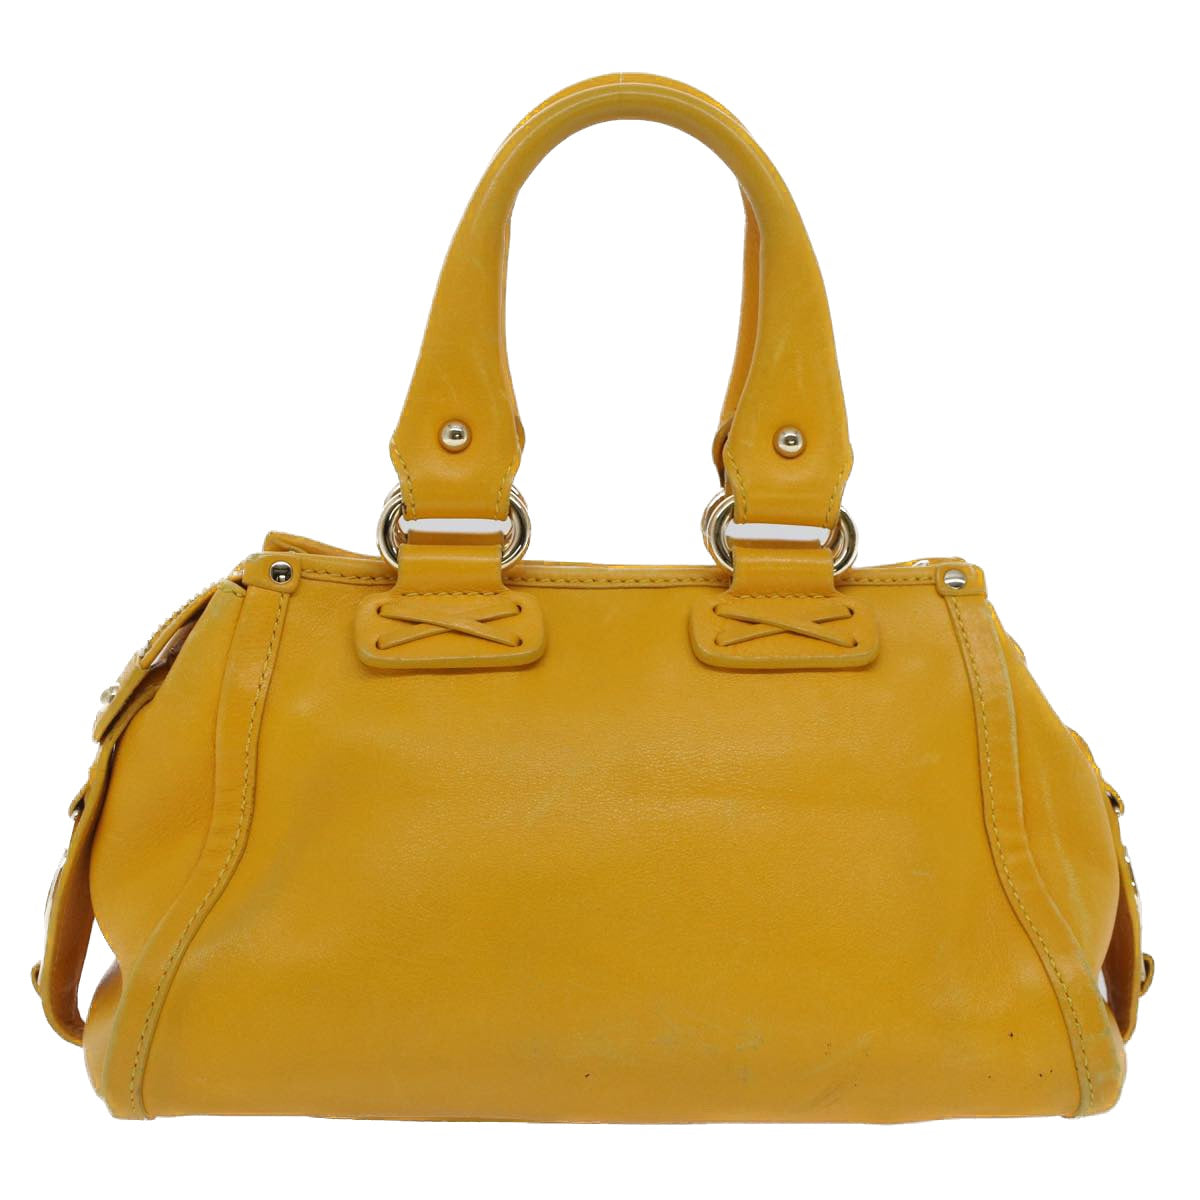 CELINE Hand Bag Leather Yellow Auth bs7391 - 0